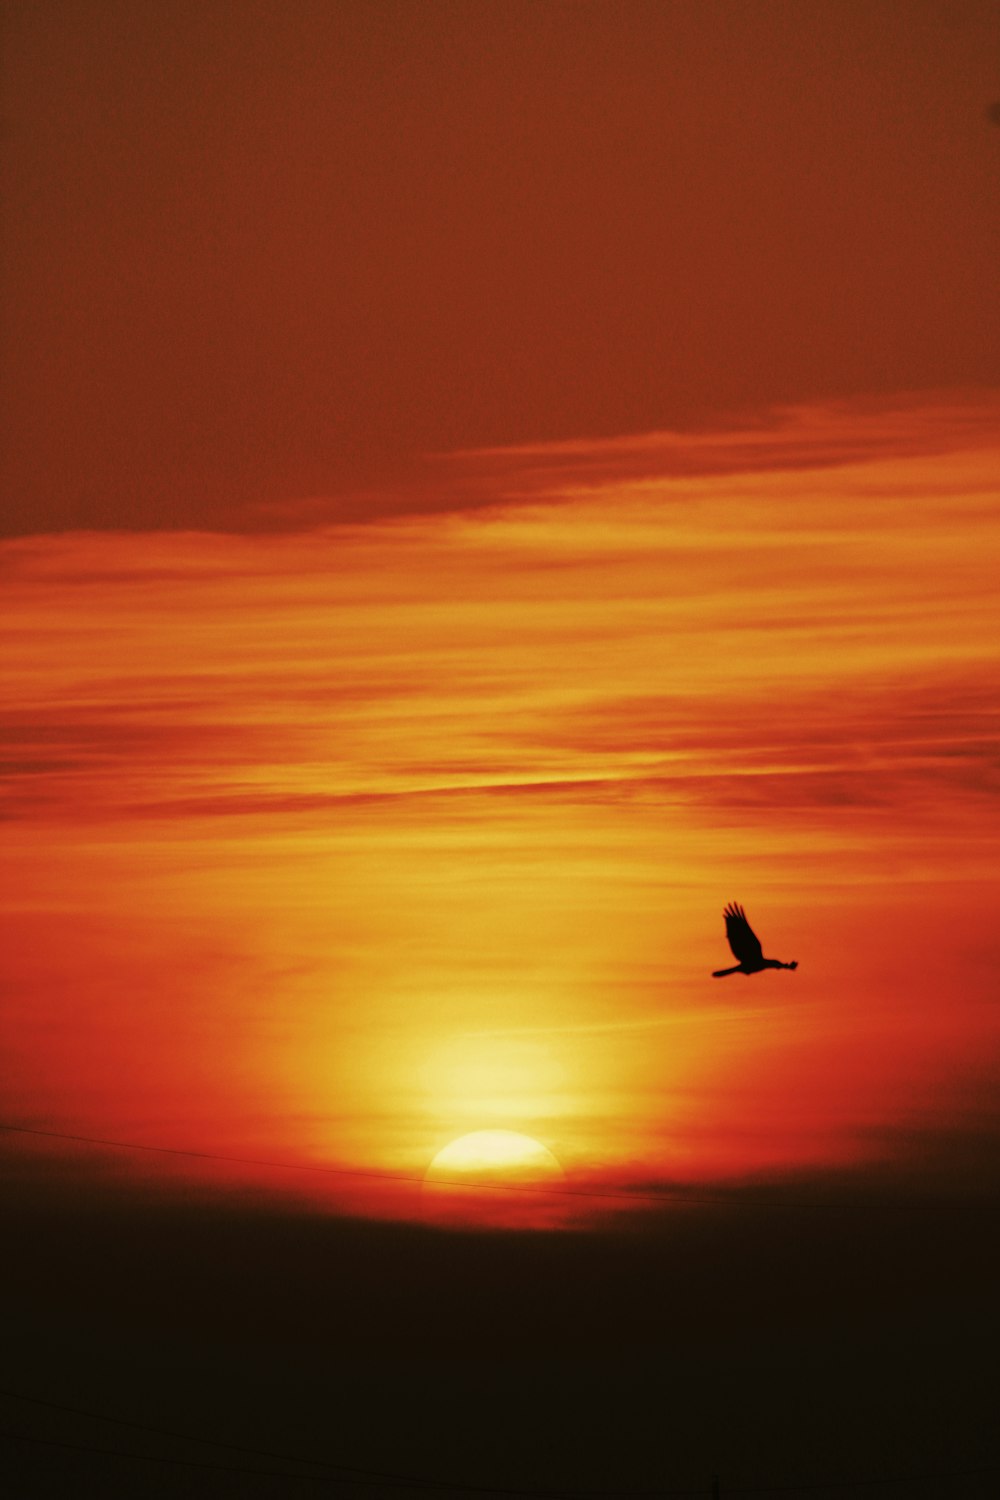 silhouette of bird flying during sunset